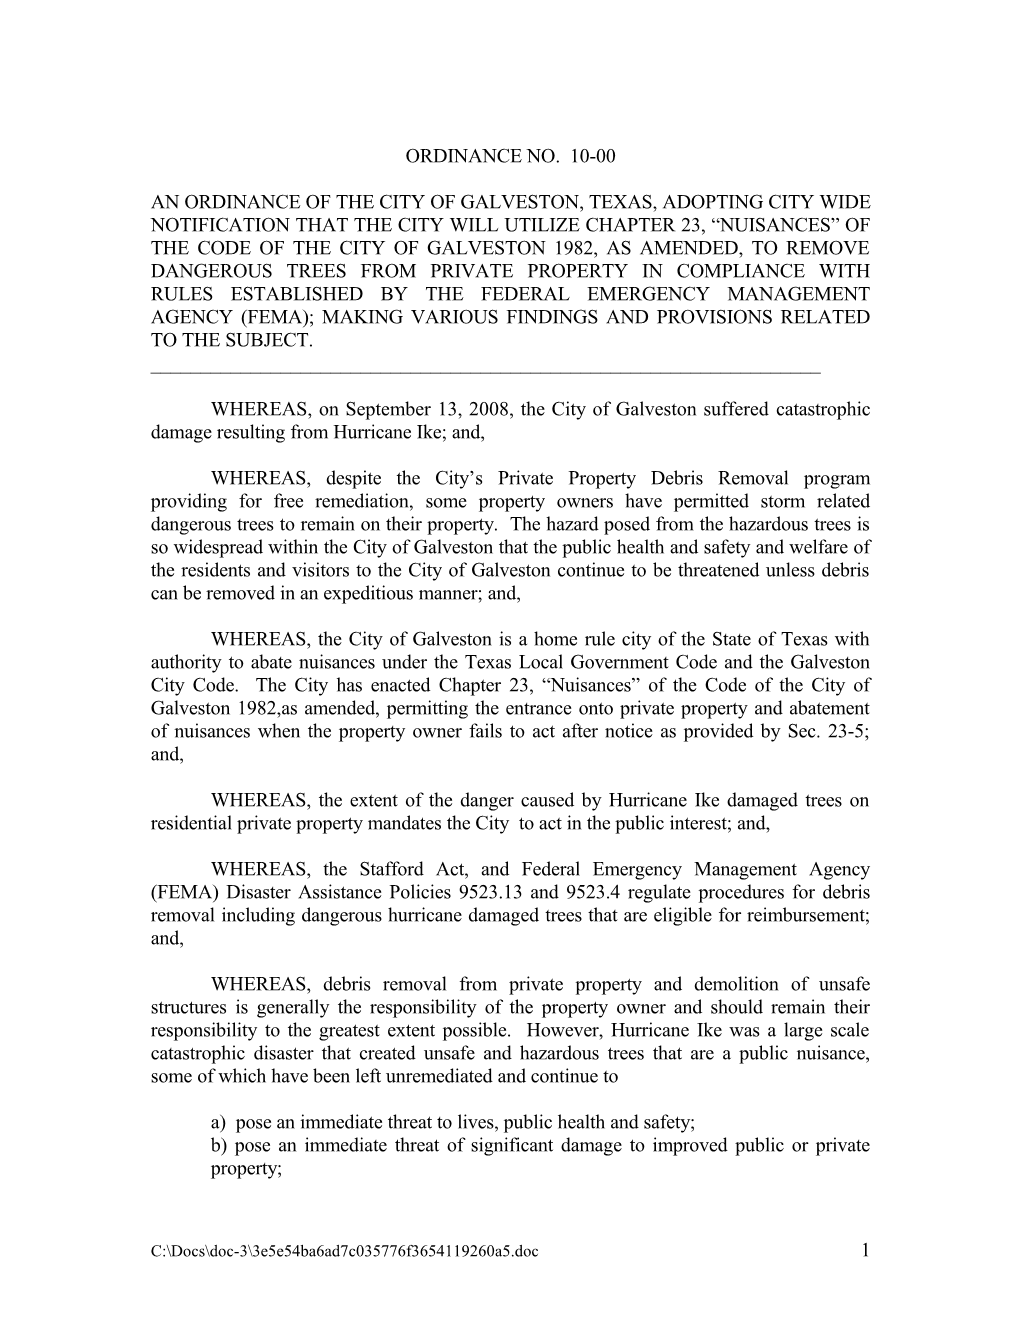 An Ordinance of the City of Galveston, Texas, Adopting City Wide Notification That The